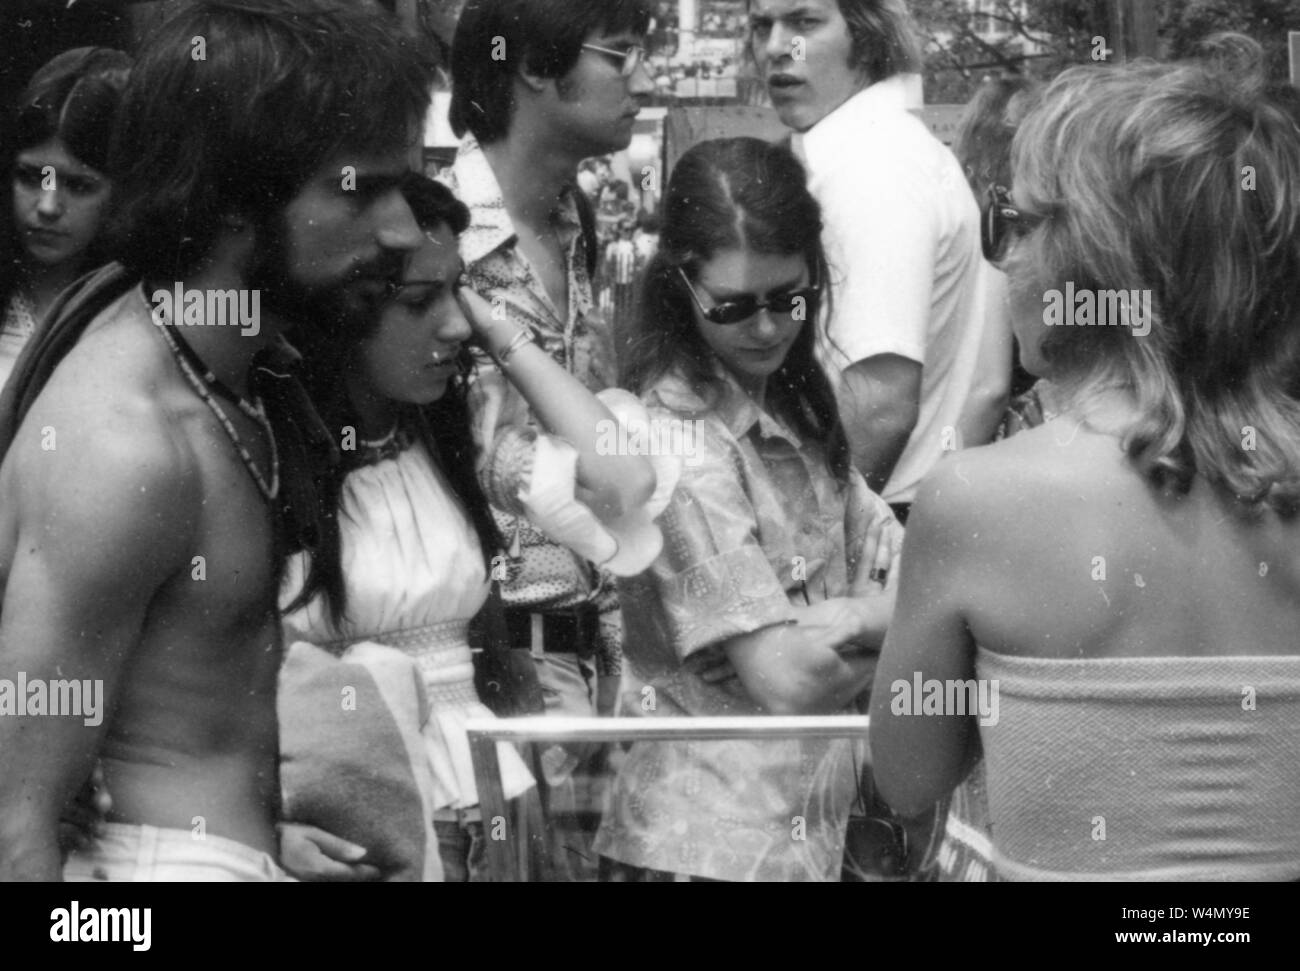 College students and other members of the Johns Hopkins and Baltimore communities are gathered on the Homewood campus for the annual Spring Fair, which included outdoor concerts, plays, rides, vendors, and more, April, 1976. From the Historical Photographs Collection, Baltimore, Maryland. () Stock Photo